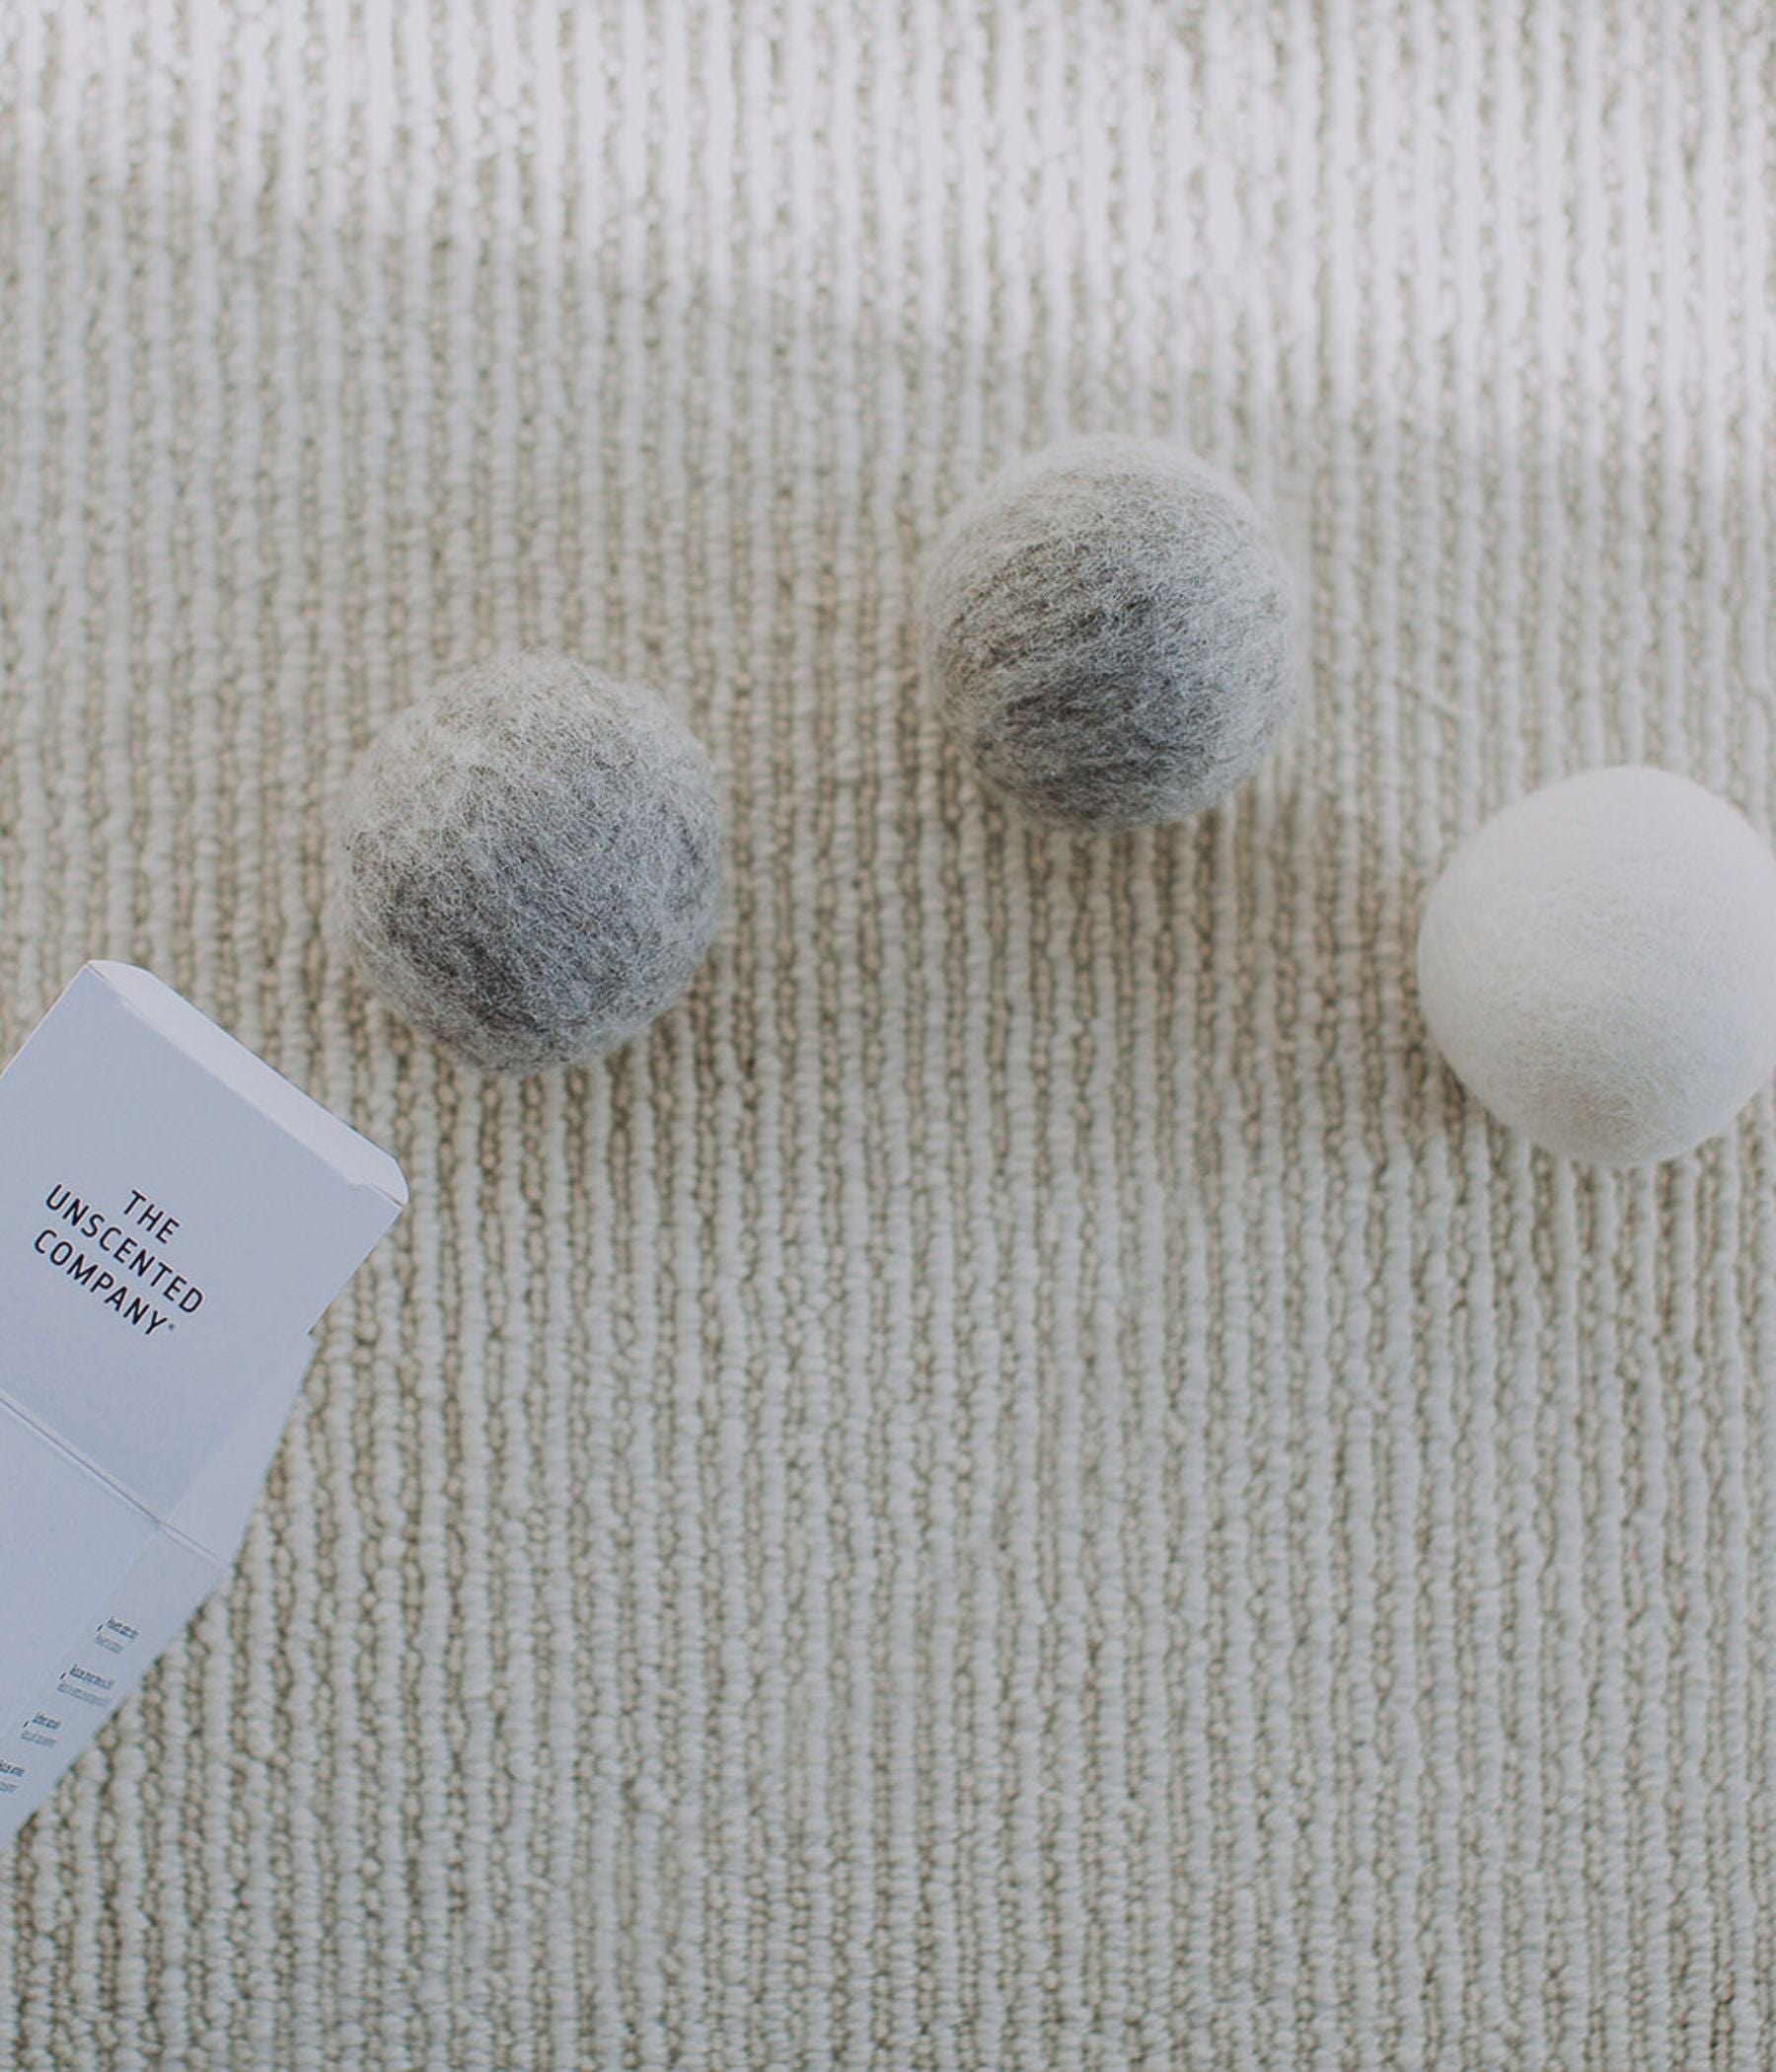 Mixture Egyptian Cotton Wool Dryer Balls 3 Pack with 2 oz Scented Oil